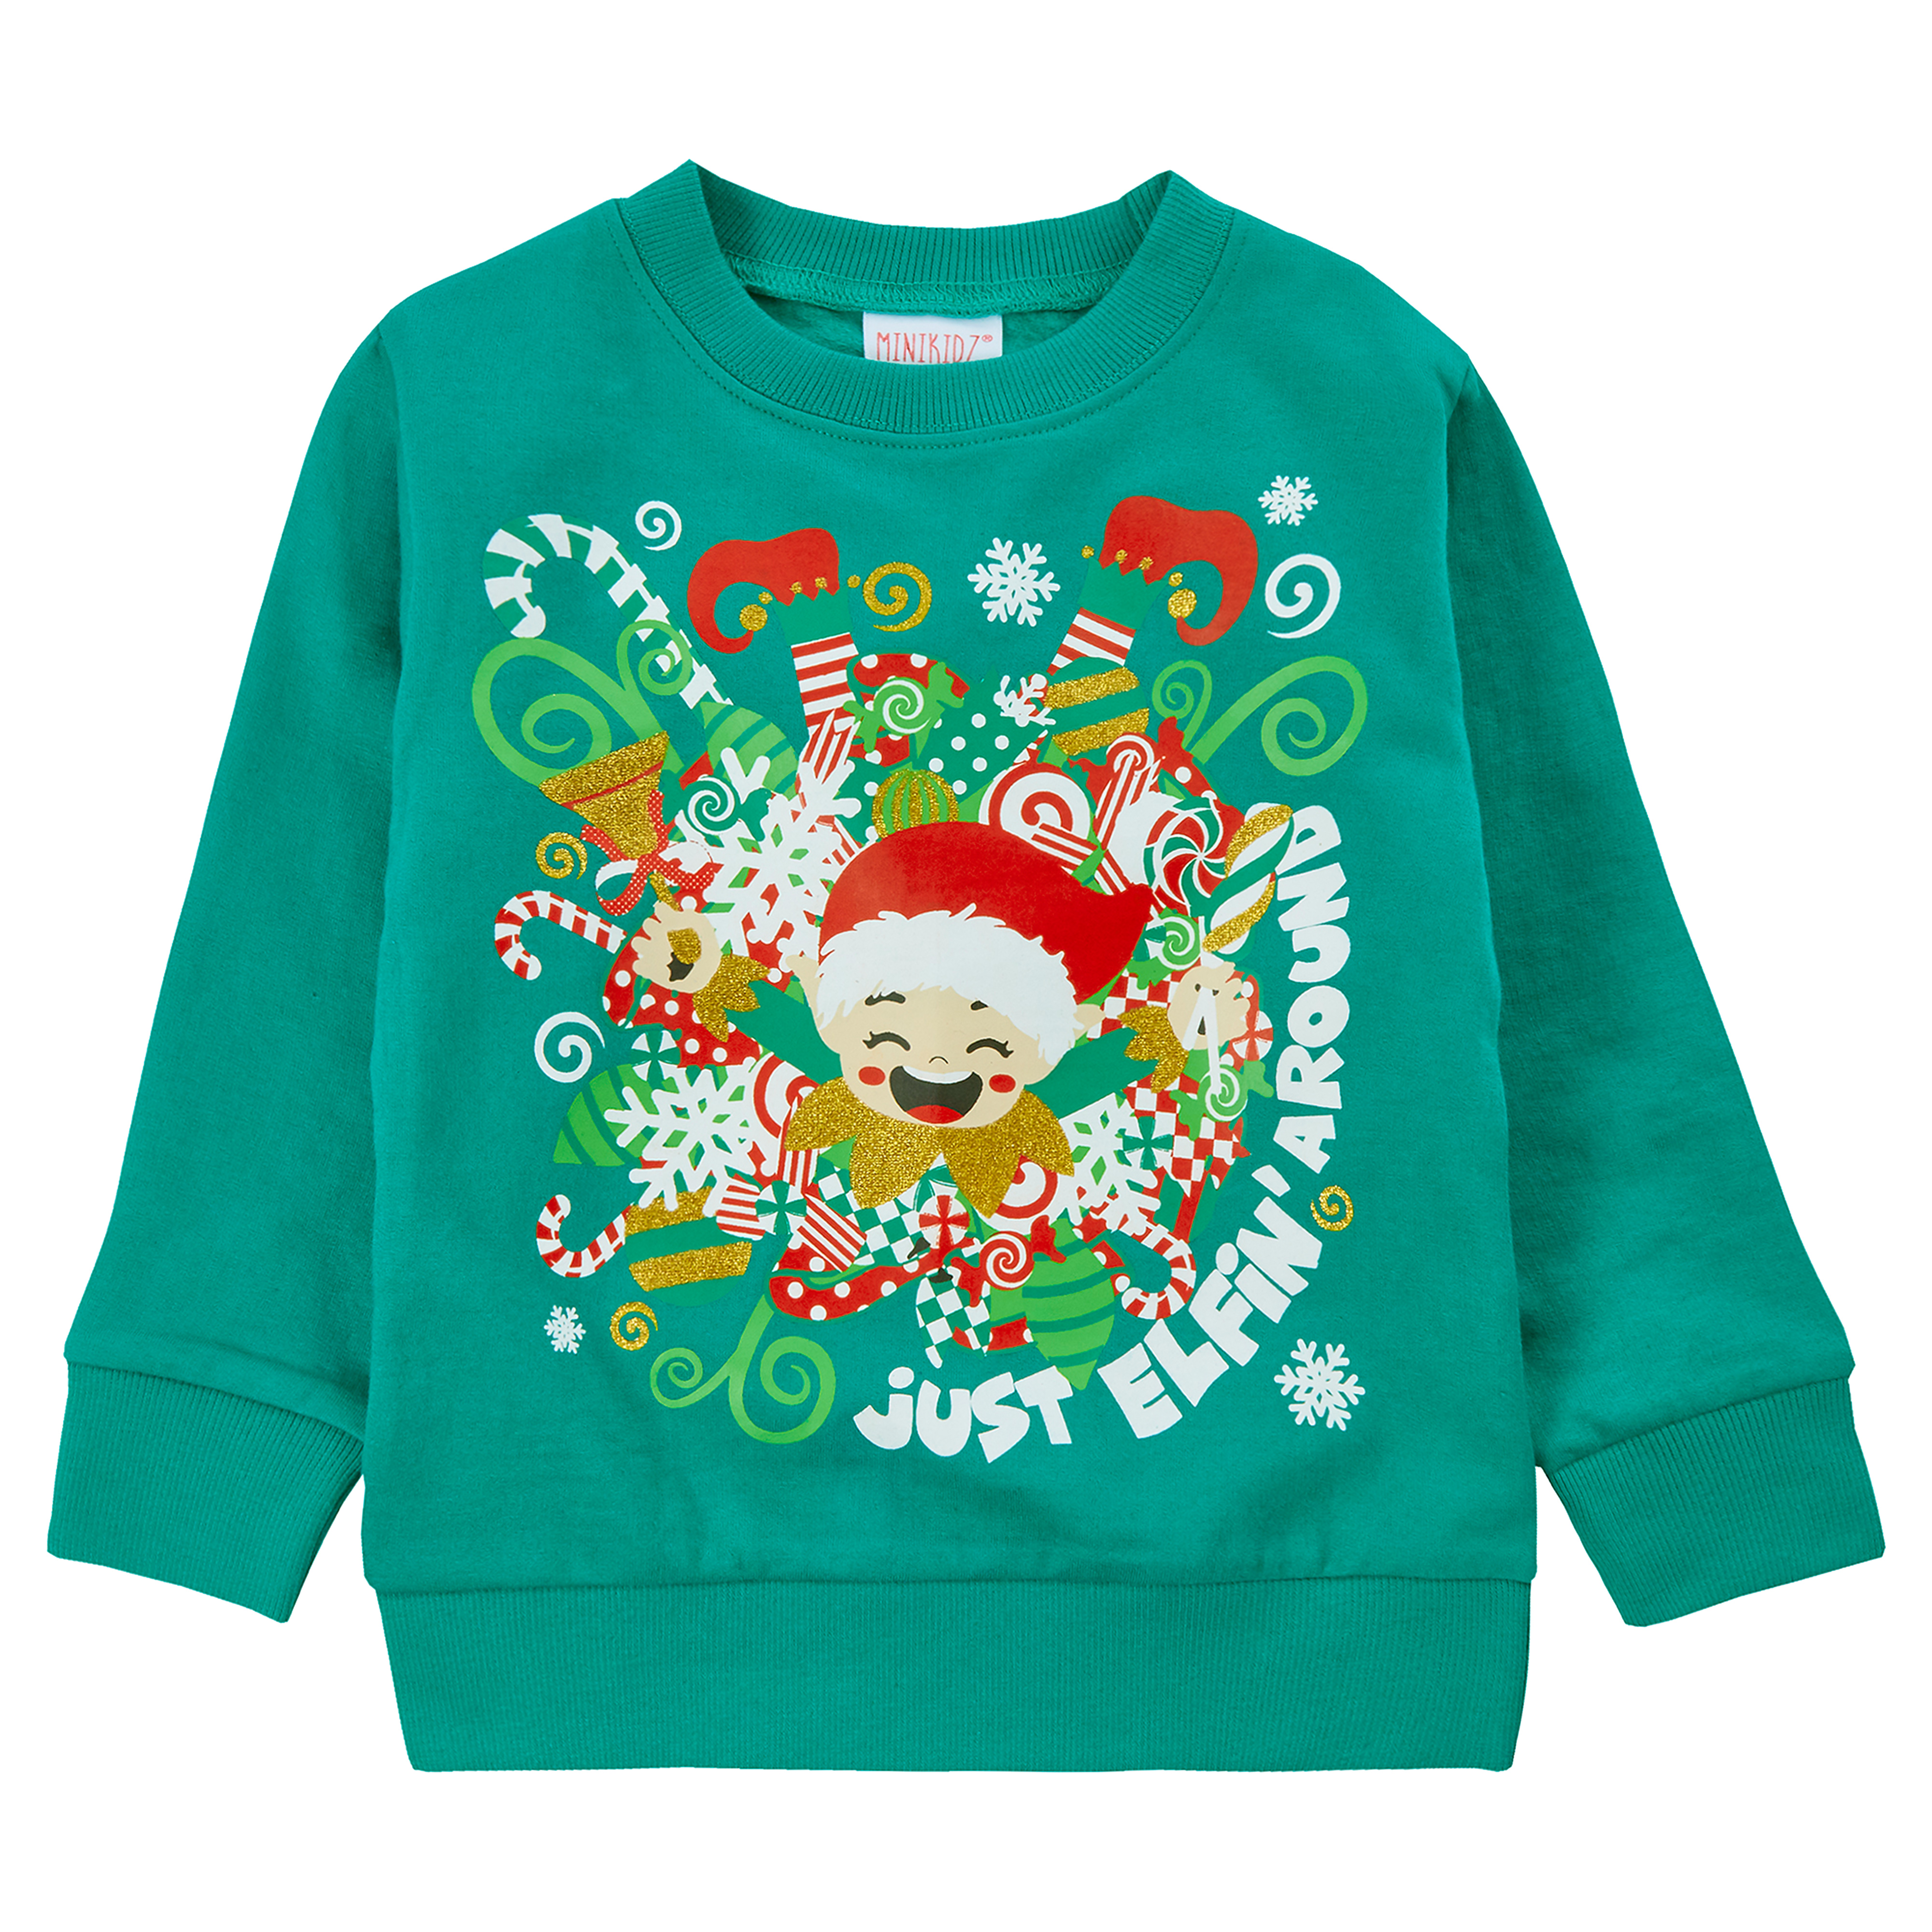 GirlzWalk Unisex Kids Girls Boys Christmas New Sweater Winter Jumper from The Age of 5/6 Years up to 13/14 Years 